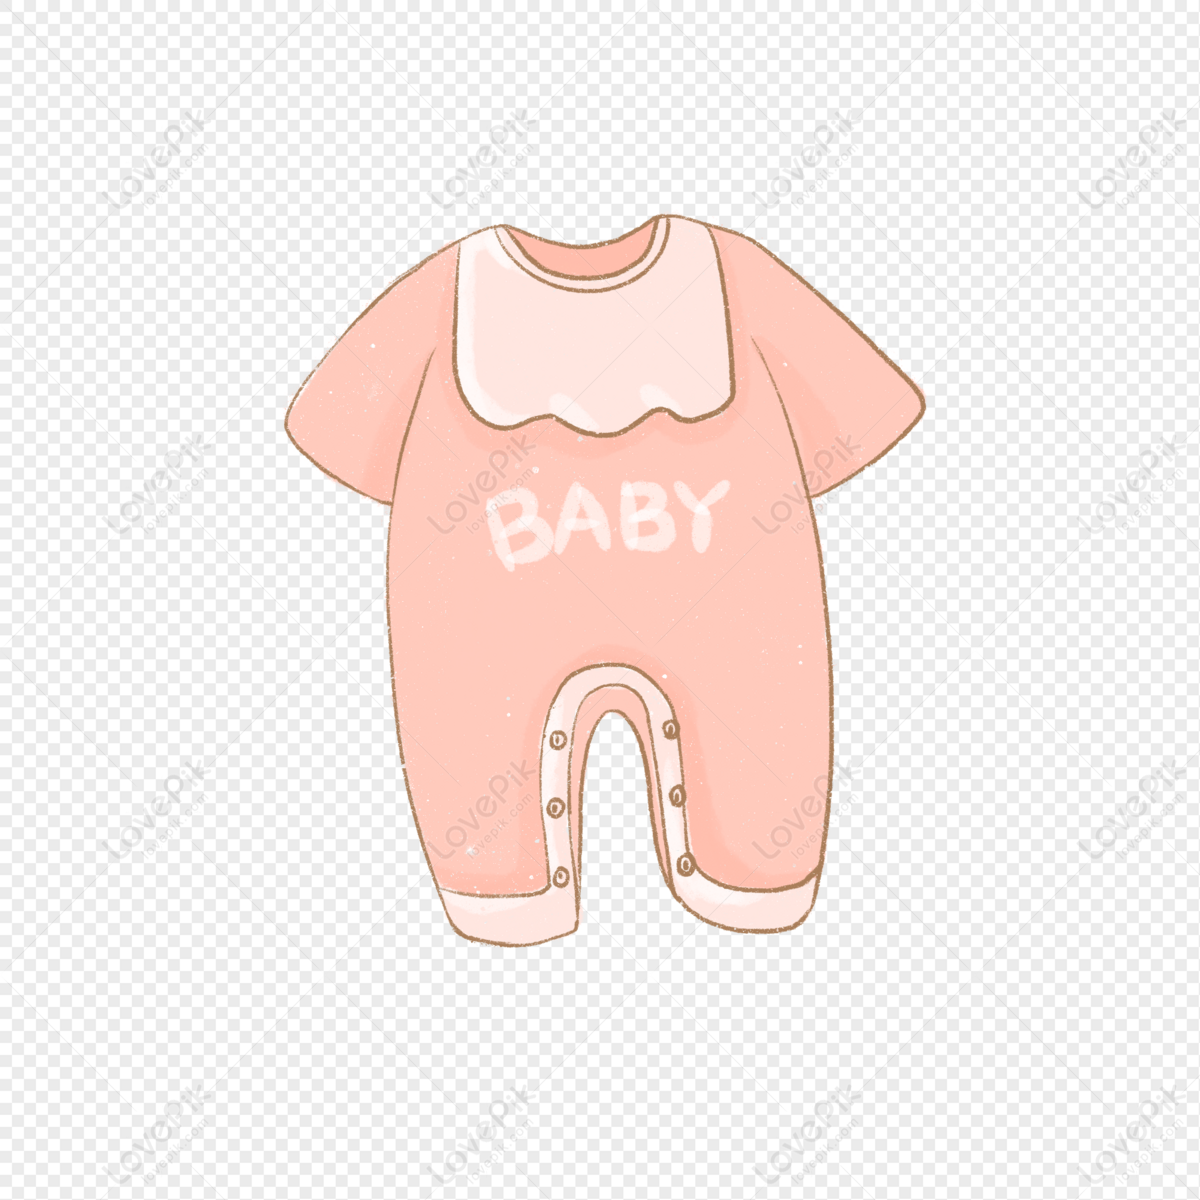 Baby Clothes Logo PNG Images With Transparent Background | Free ...